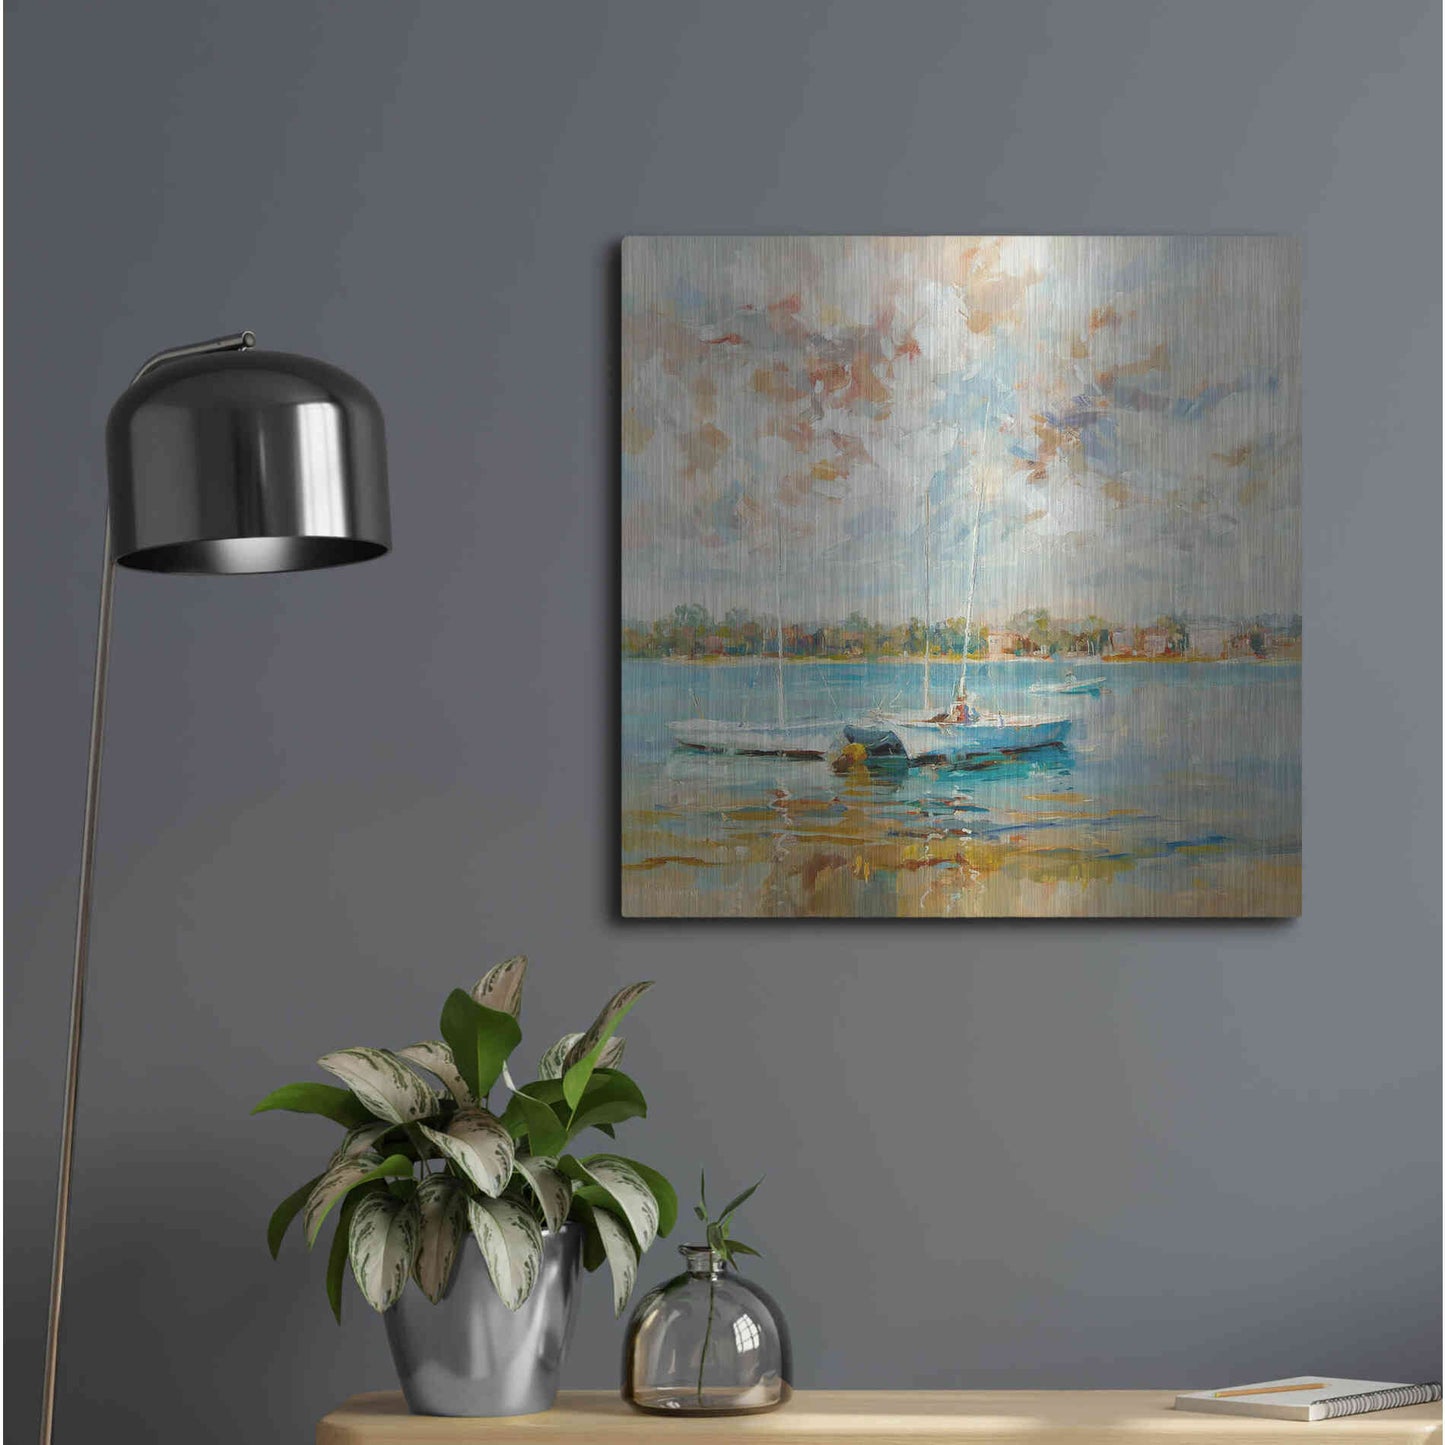 Luxe Metal Art 'At Water?s Edge' by Kasia Bruniany Metal Wall Art,24x24